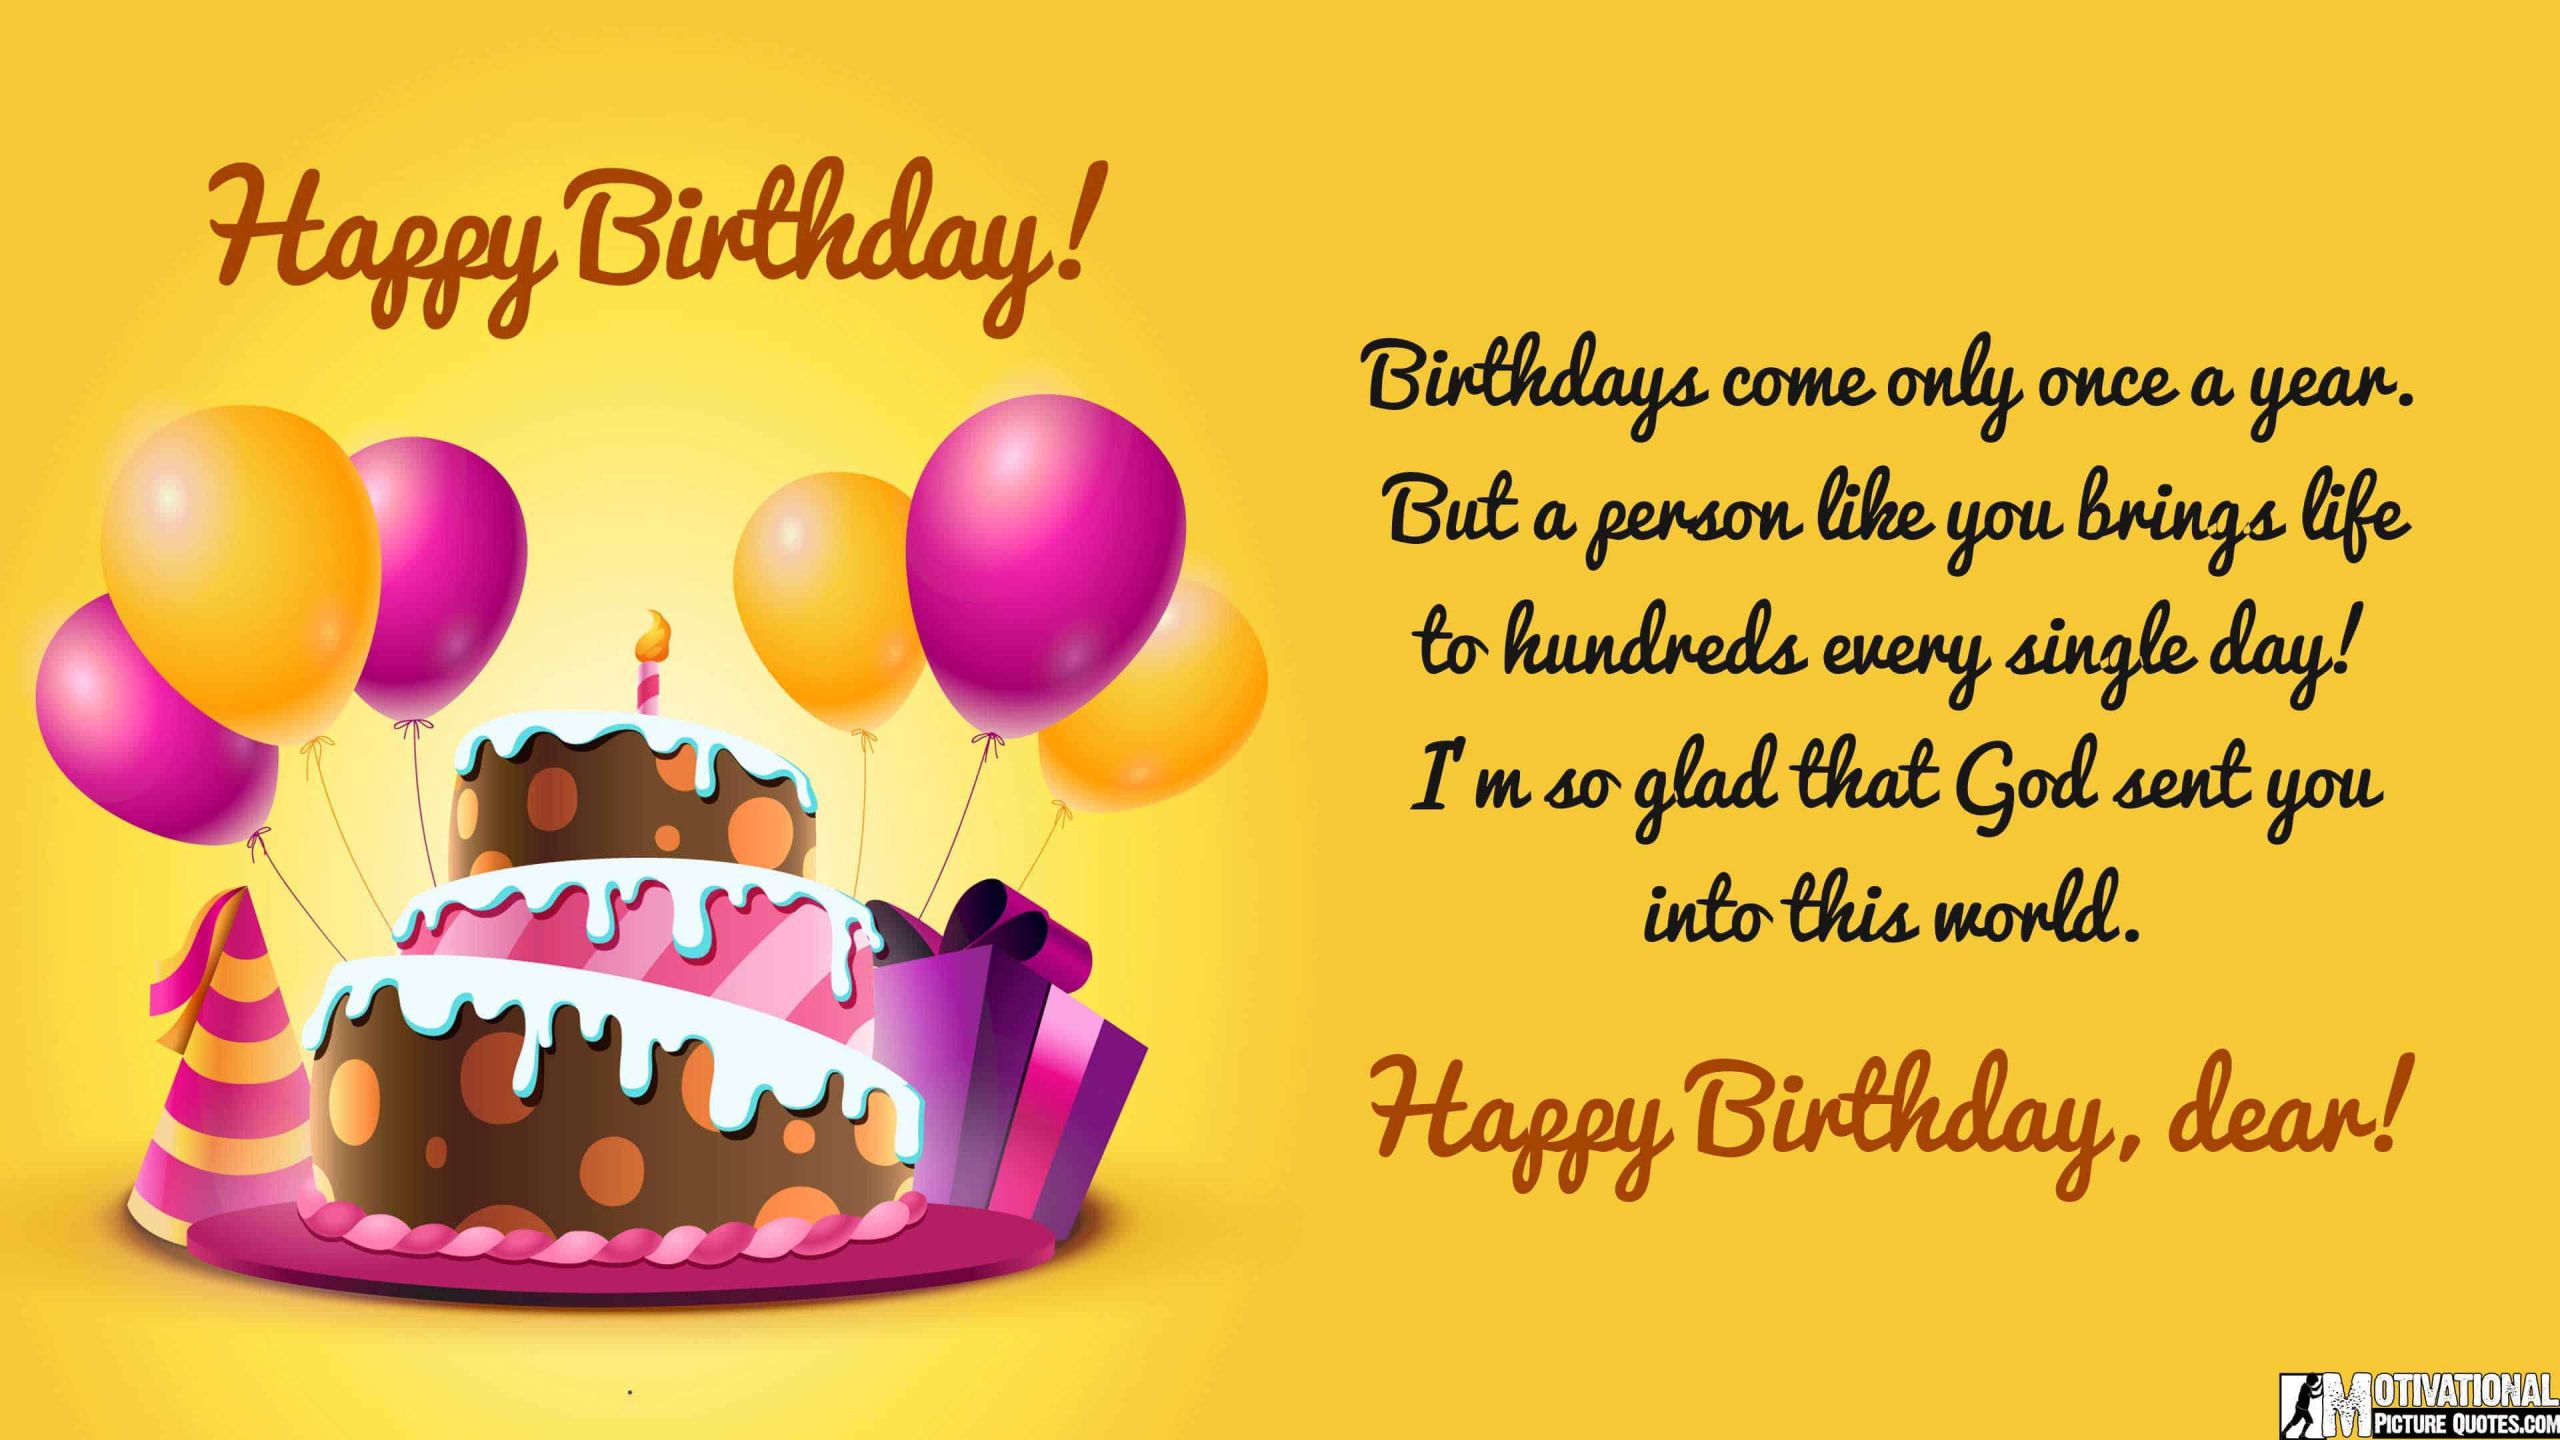 Wishing You A Happy Birthday Quotes
 50 Happy Birthday For Him With Quotes iLove Messages